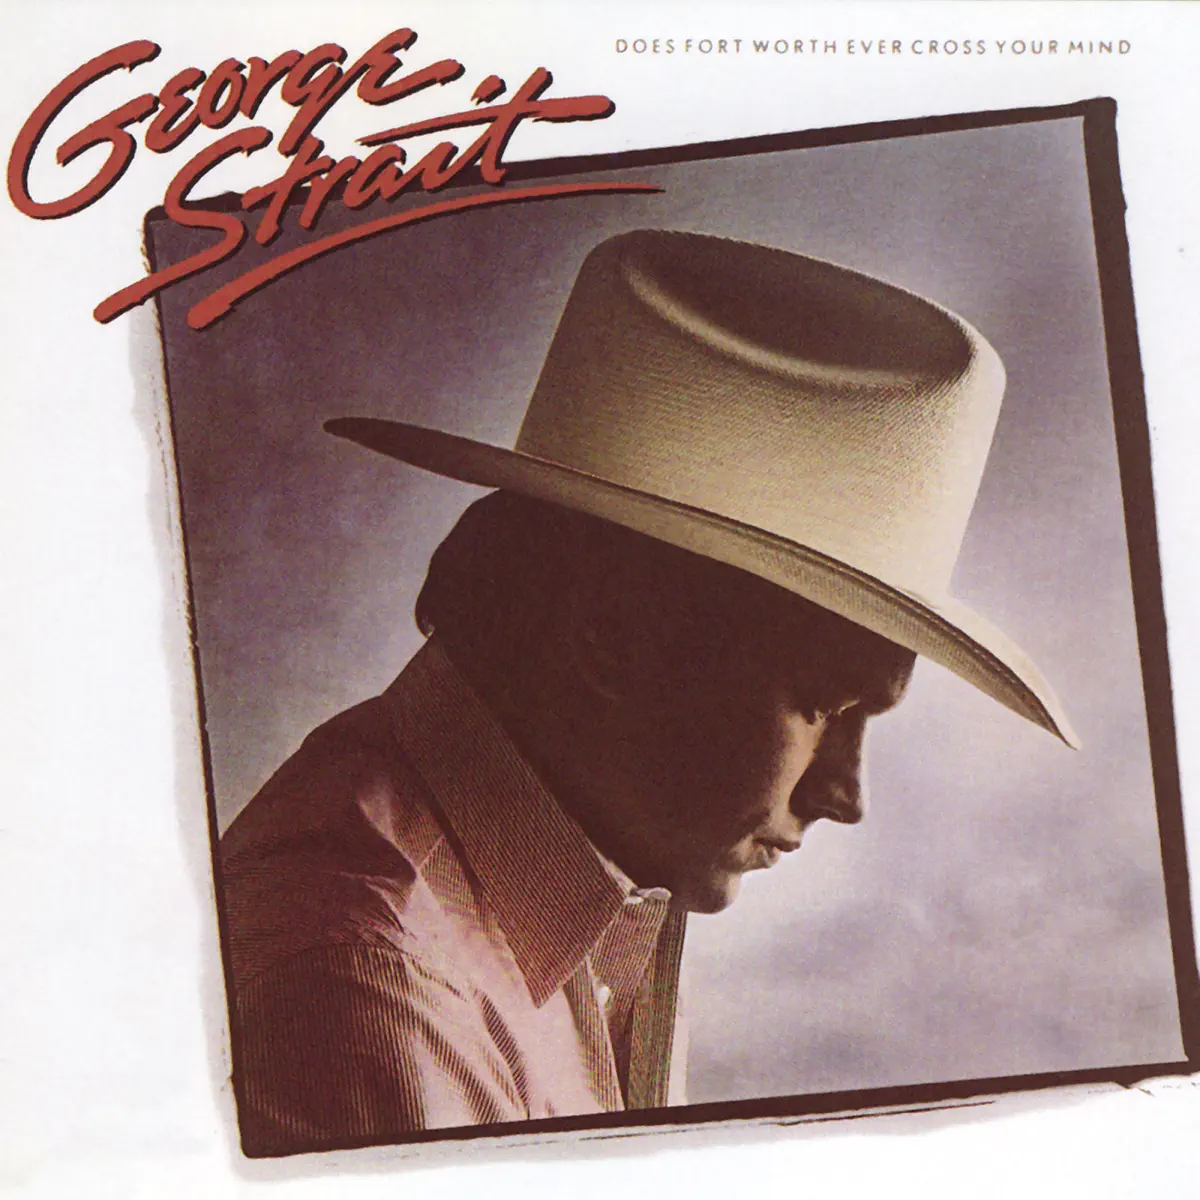 George Strait - Does Fort Worth Ever Cross Your Mind (1984) [iTunes Plus AAC M4A]-新房子